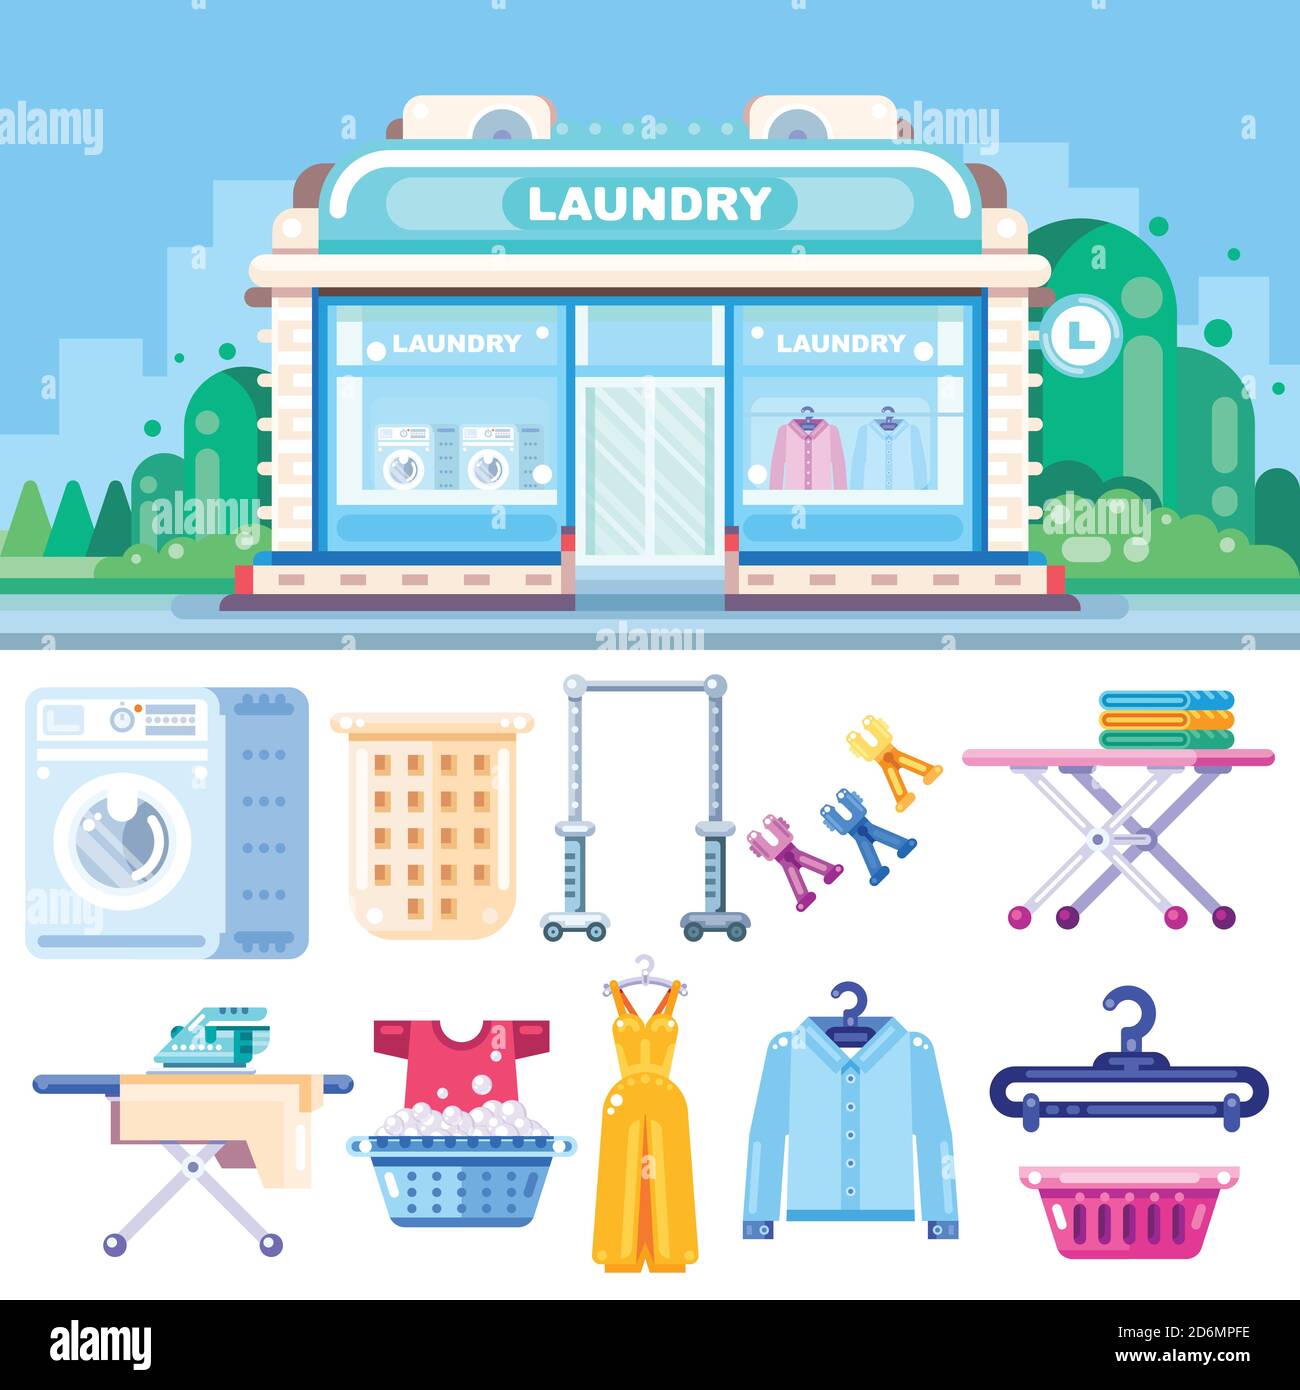 Laundry building, vector flat illustration. Laundry, dry cleaning, clothes washing and ironing service. Housekeeping, housework design elements. Stock Vector